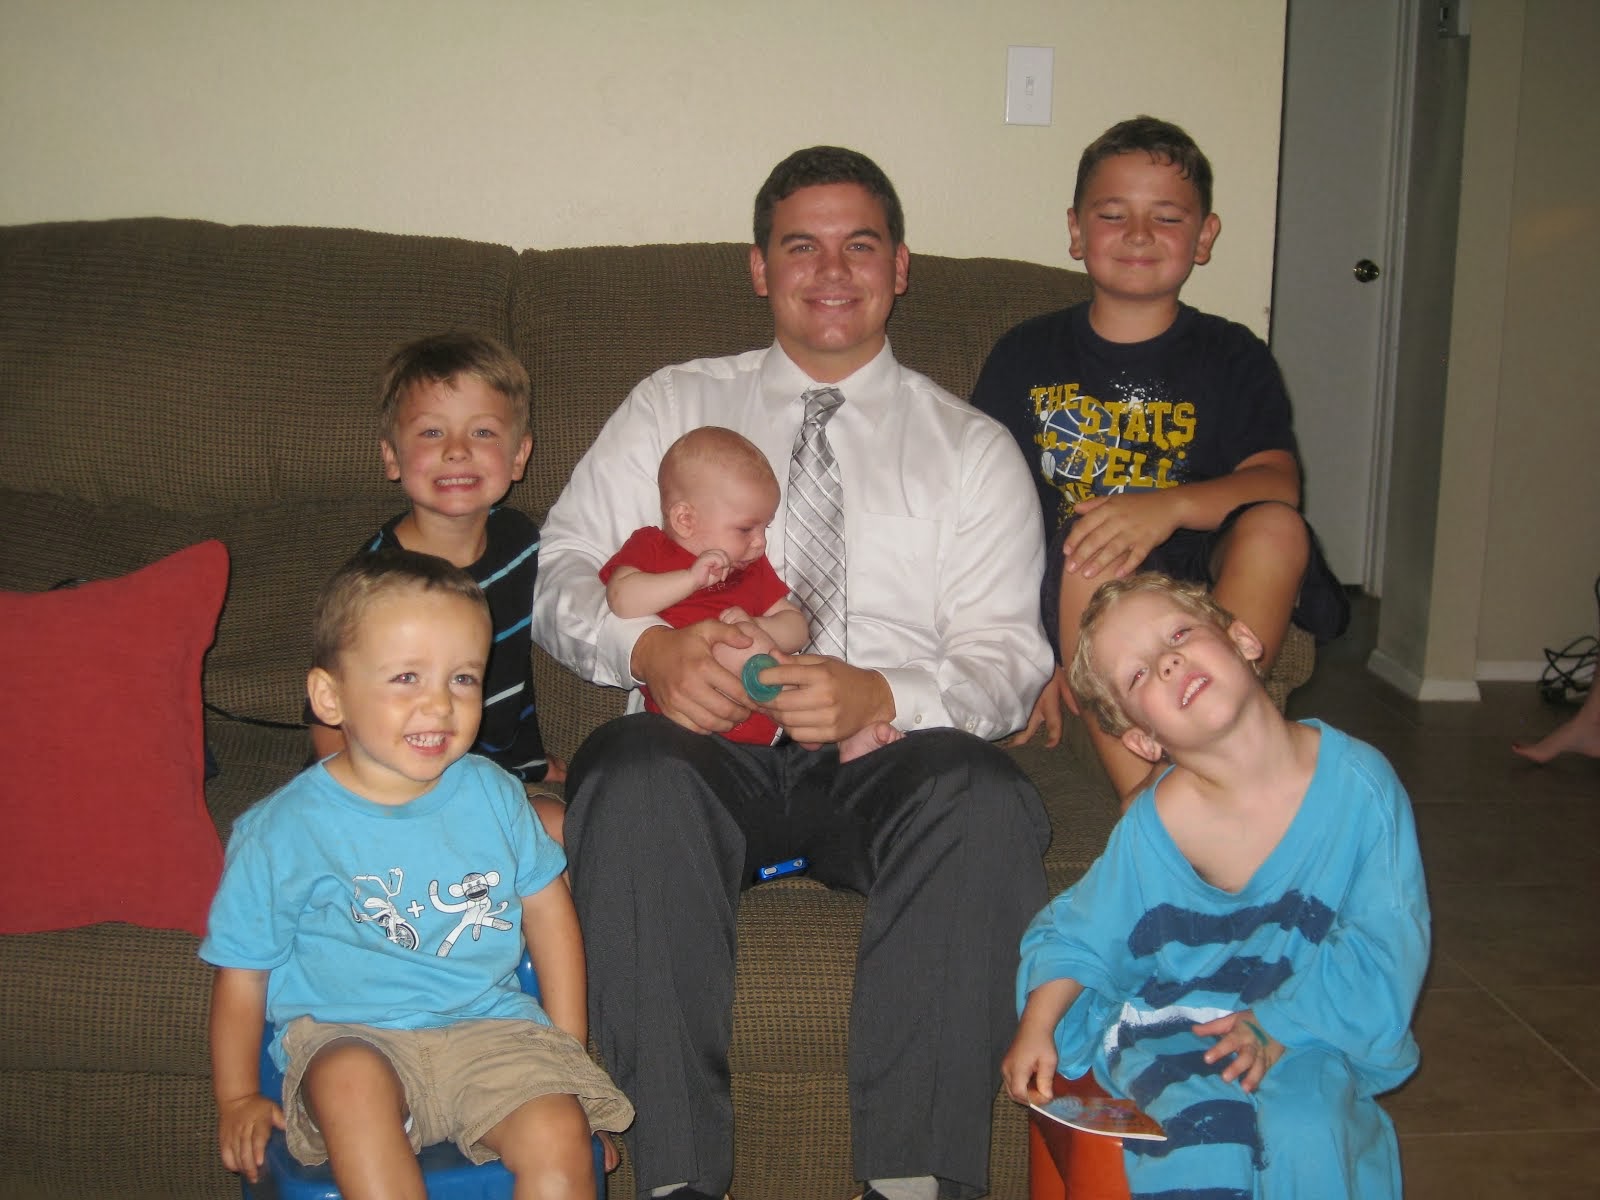 Duncan and his 5 nephews